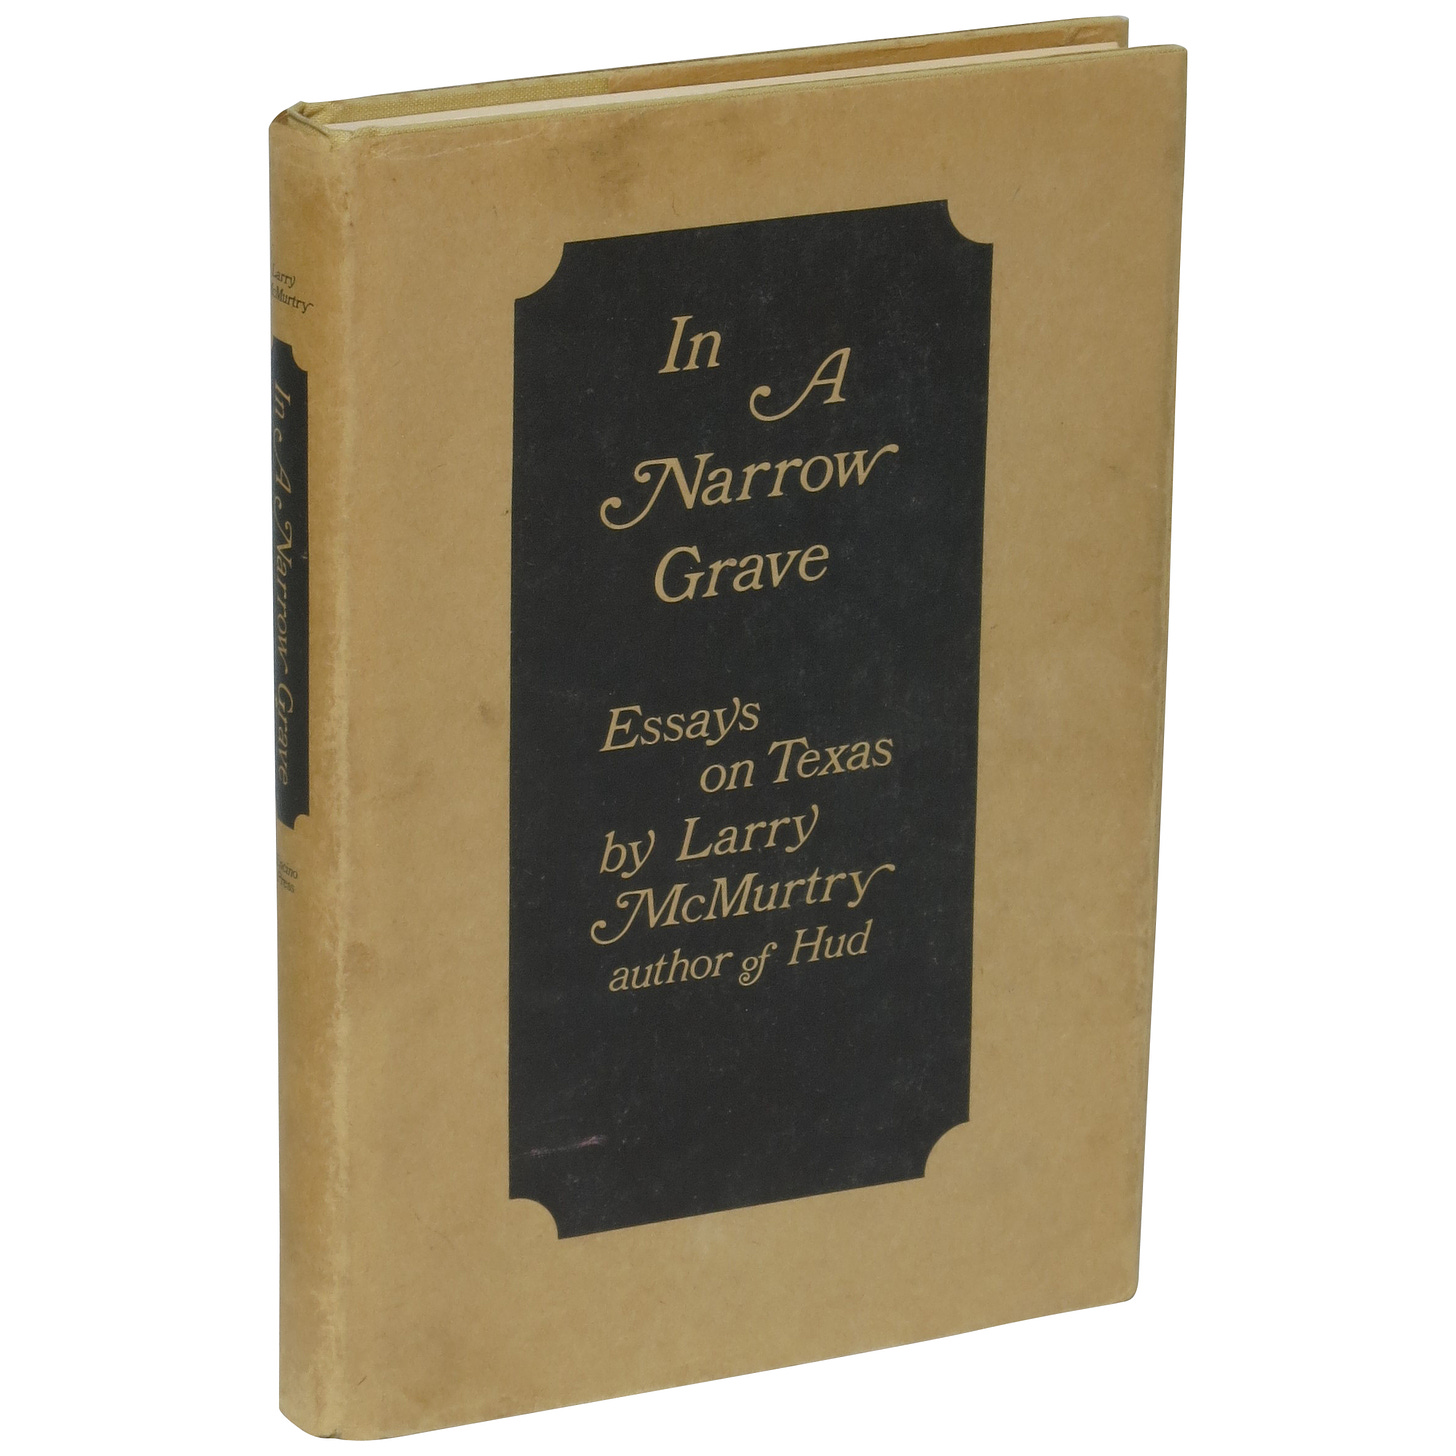 The first edition of In a Narrow Grave by Larry McMurtry